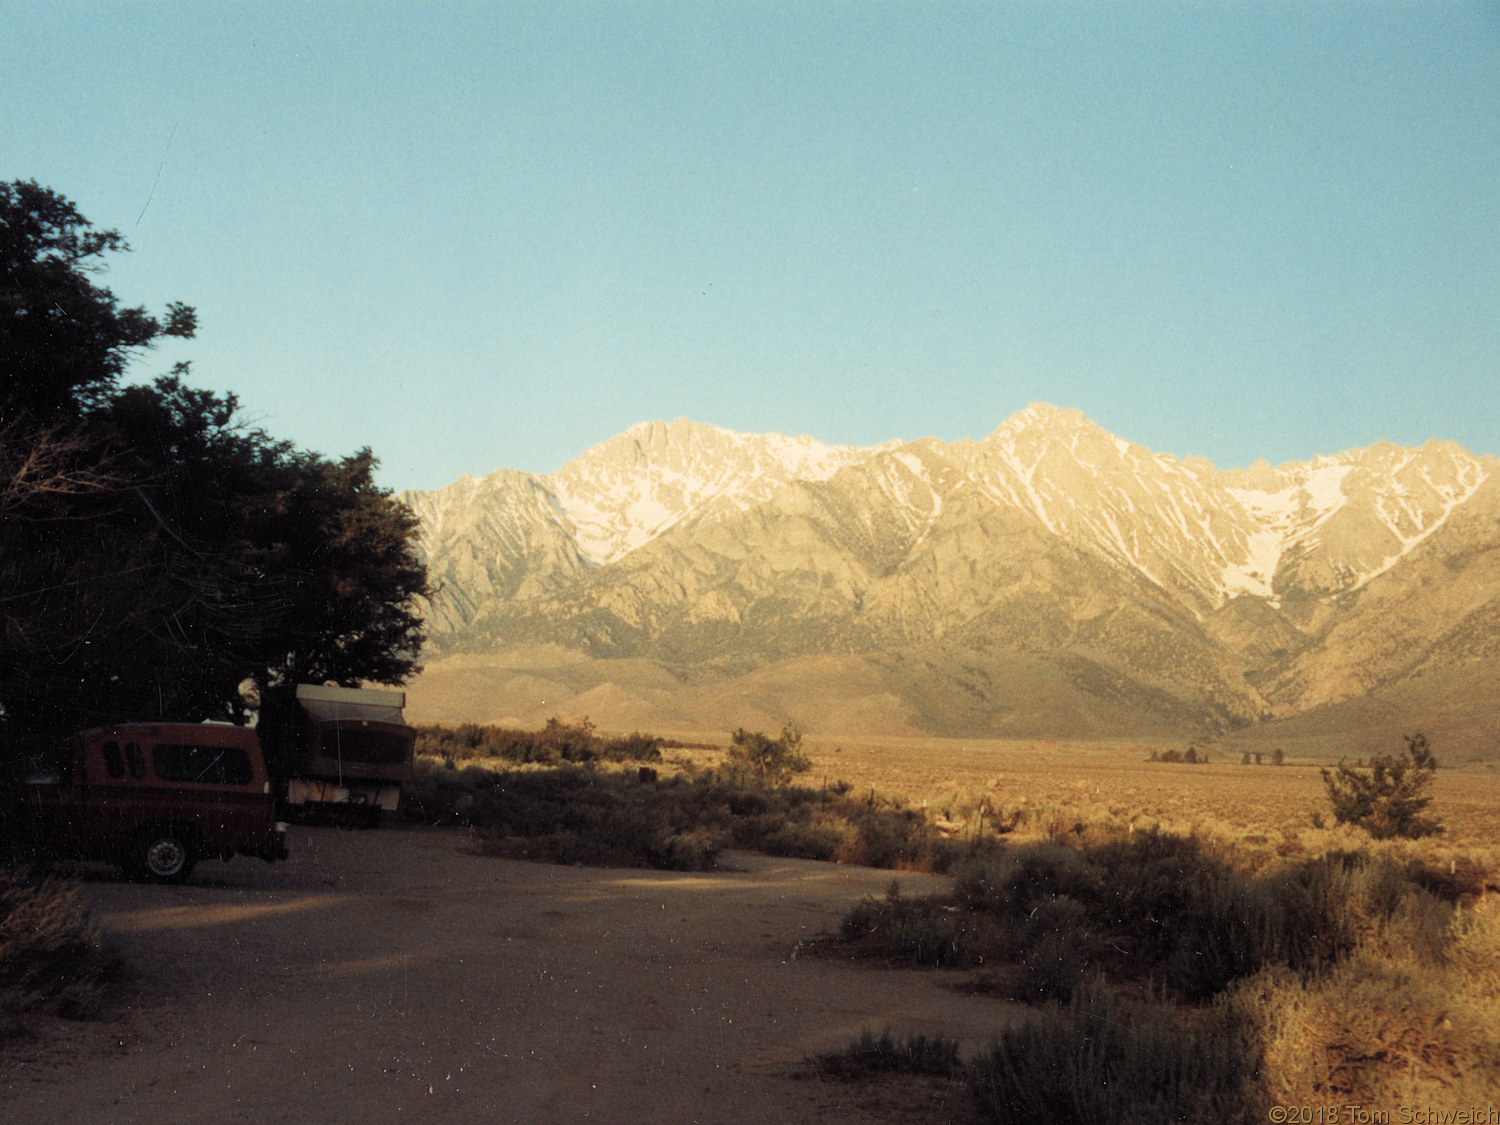 California, Inyo County, Independence Creek Campground